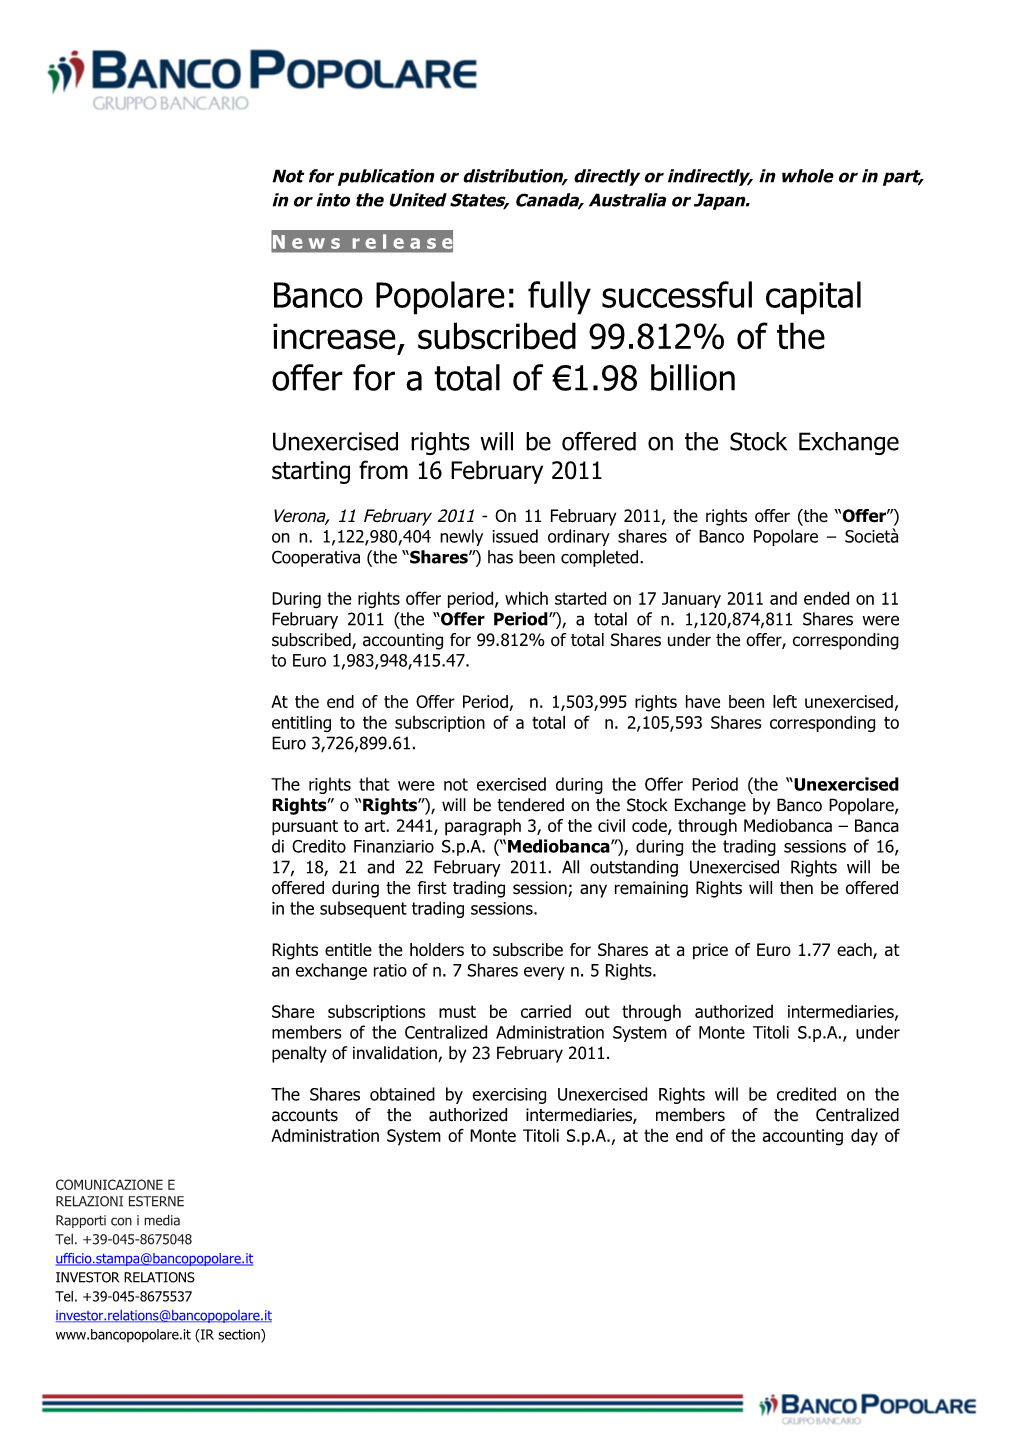 Banco Popolare: Fully Successful Capital Increase, Subscribed 99.812% of the Offer for a Total of €1.98 Billion